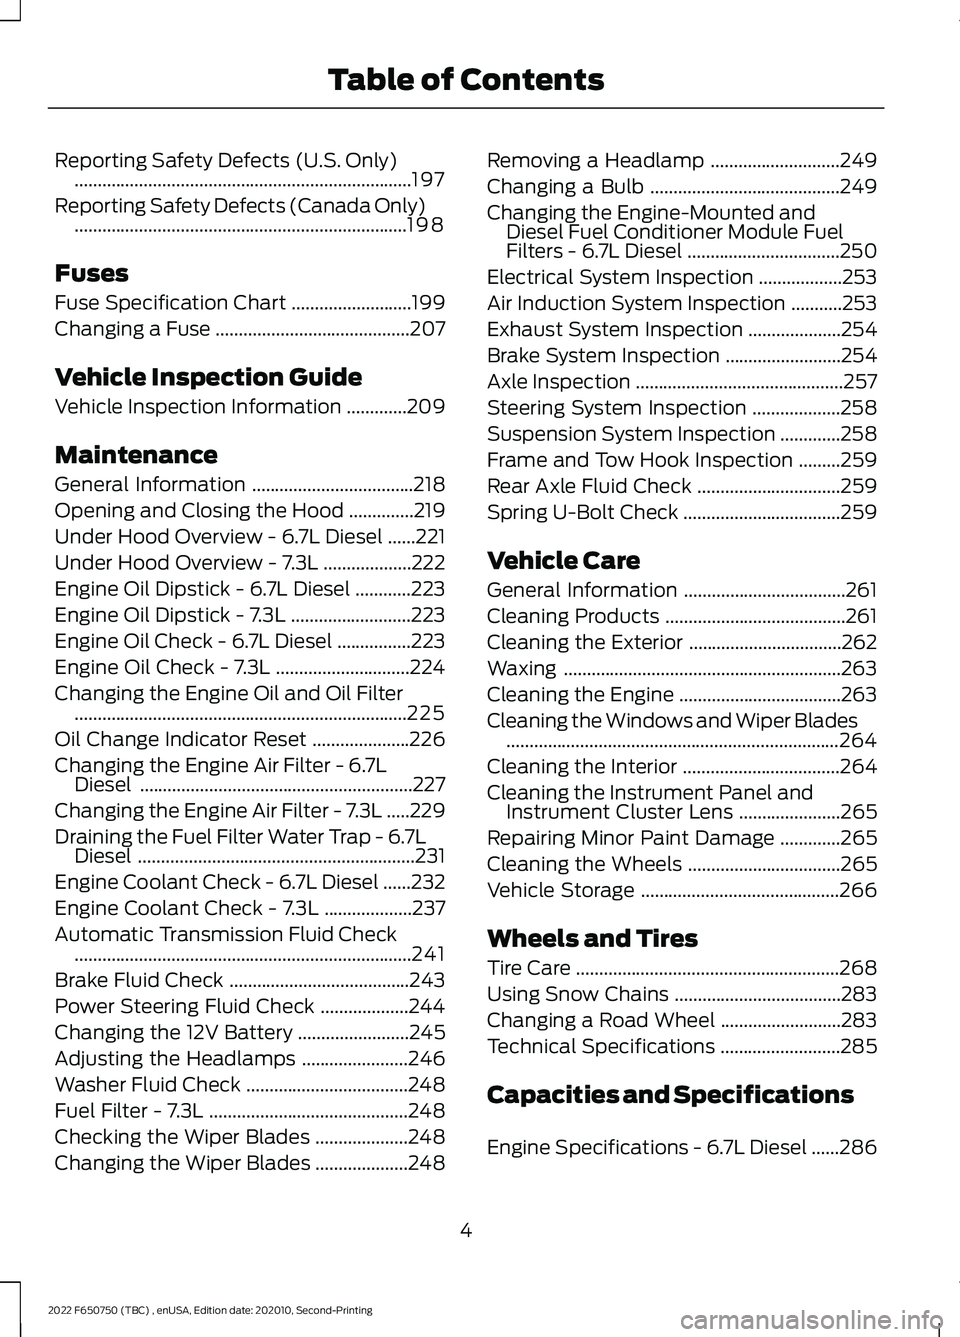 FORD F-650/750 2022  Owners Manual Reporting Safety Defects (U.S. Only)
........................................................................\
.197
Reporting Safety Defects (Canada Only) .............................................